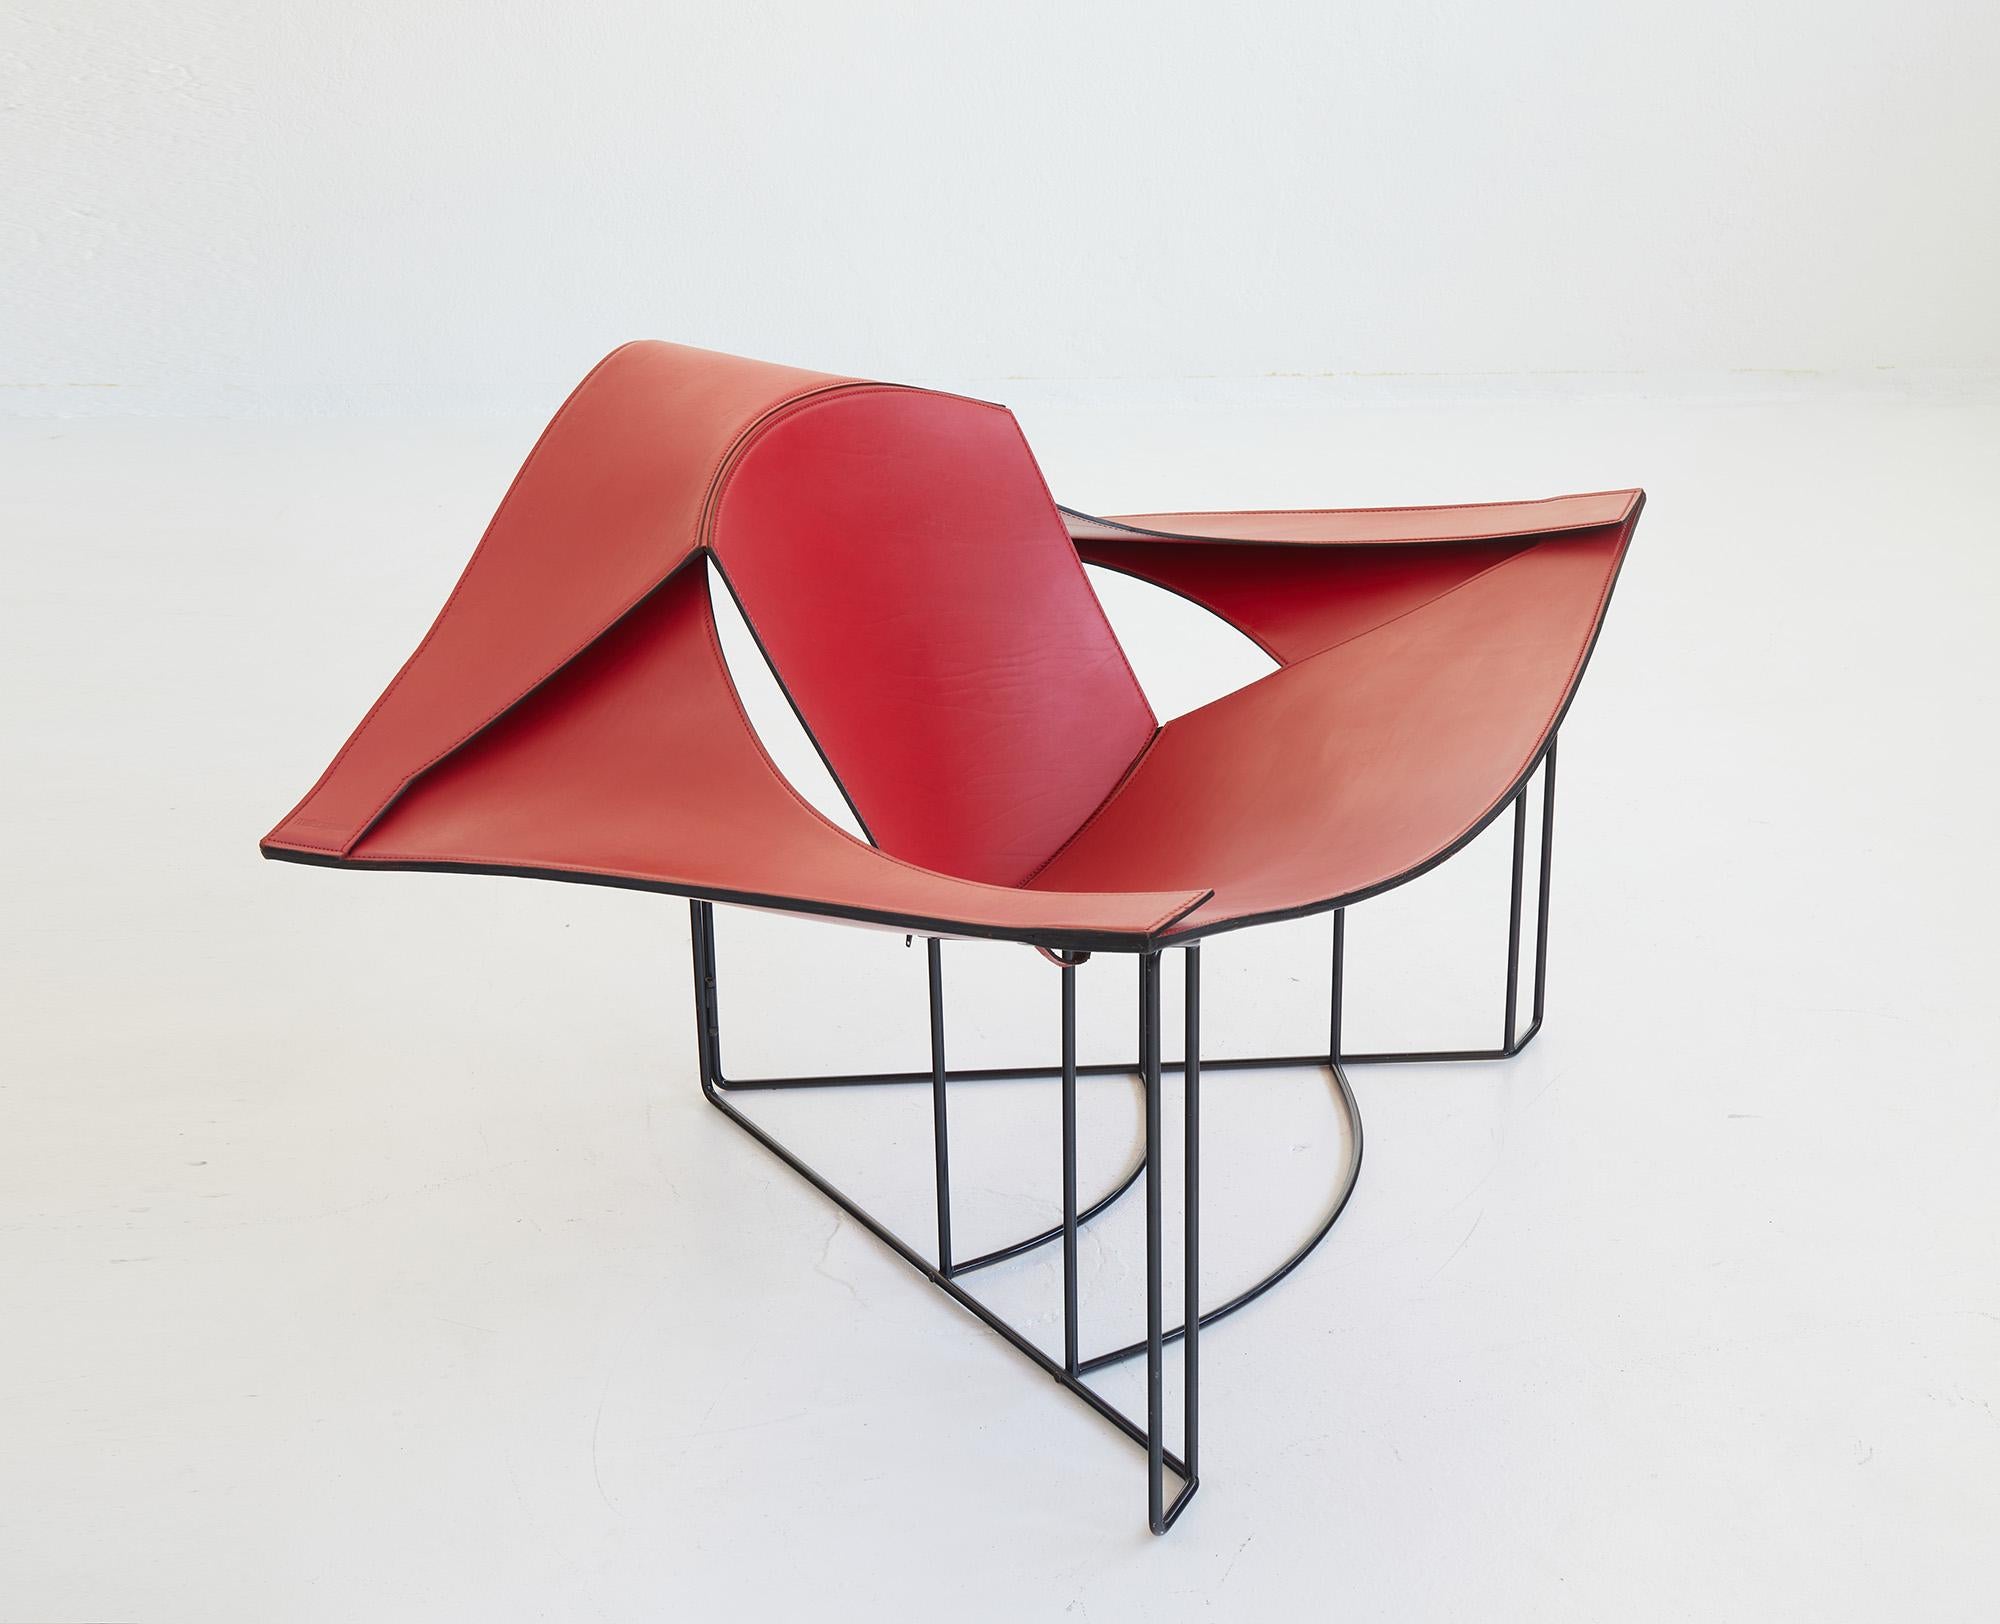 Sculptural lounge chair designed by Jacques Harold Pollard for Matteo Grassi Italy in 1987. 

The chair features hand-stitched dark red leather panels that seamlessly blend with its architectural framework. The chair's frame crafted from